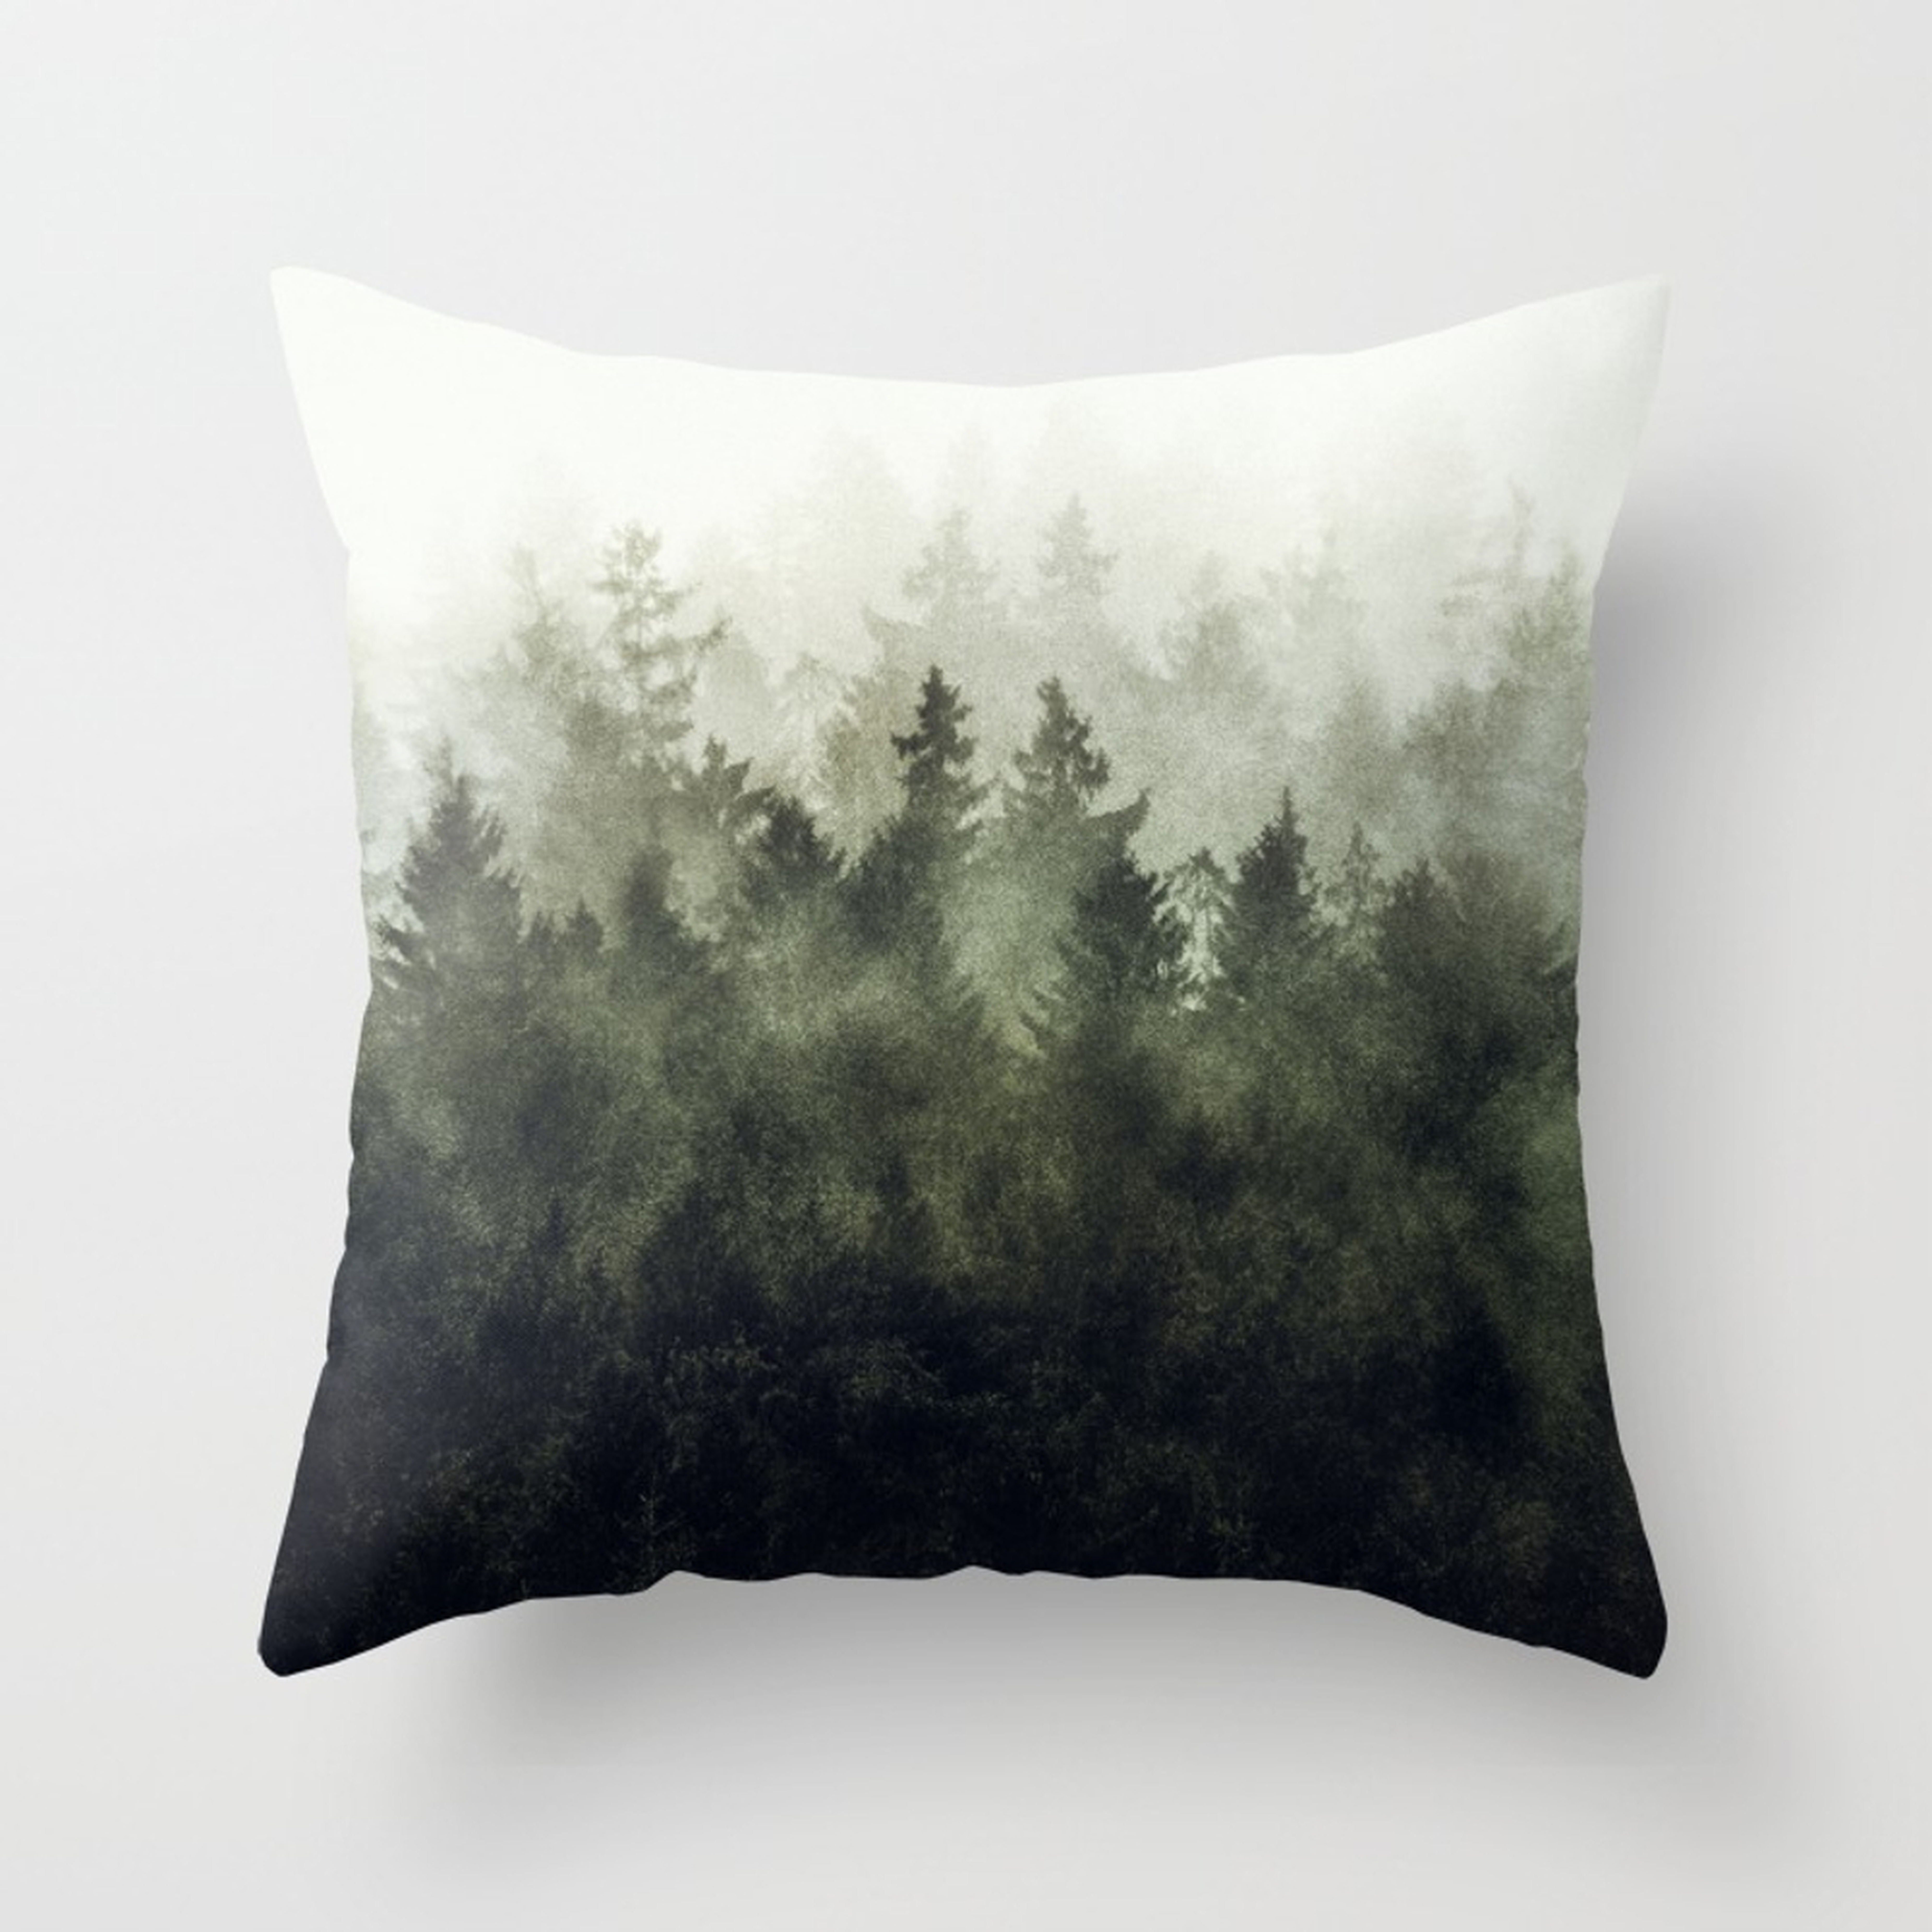 The Heart Of My Heart // Green Mountain Edit Throw Pillow by Tordis Kayma - Cover (18" x 18") With Pillow Insert - Indoor Pillow - Society6